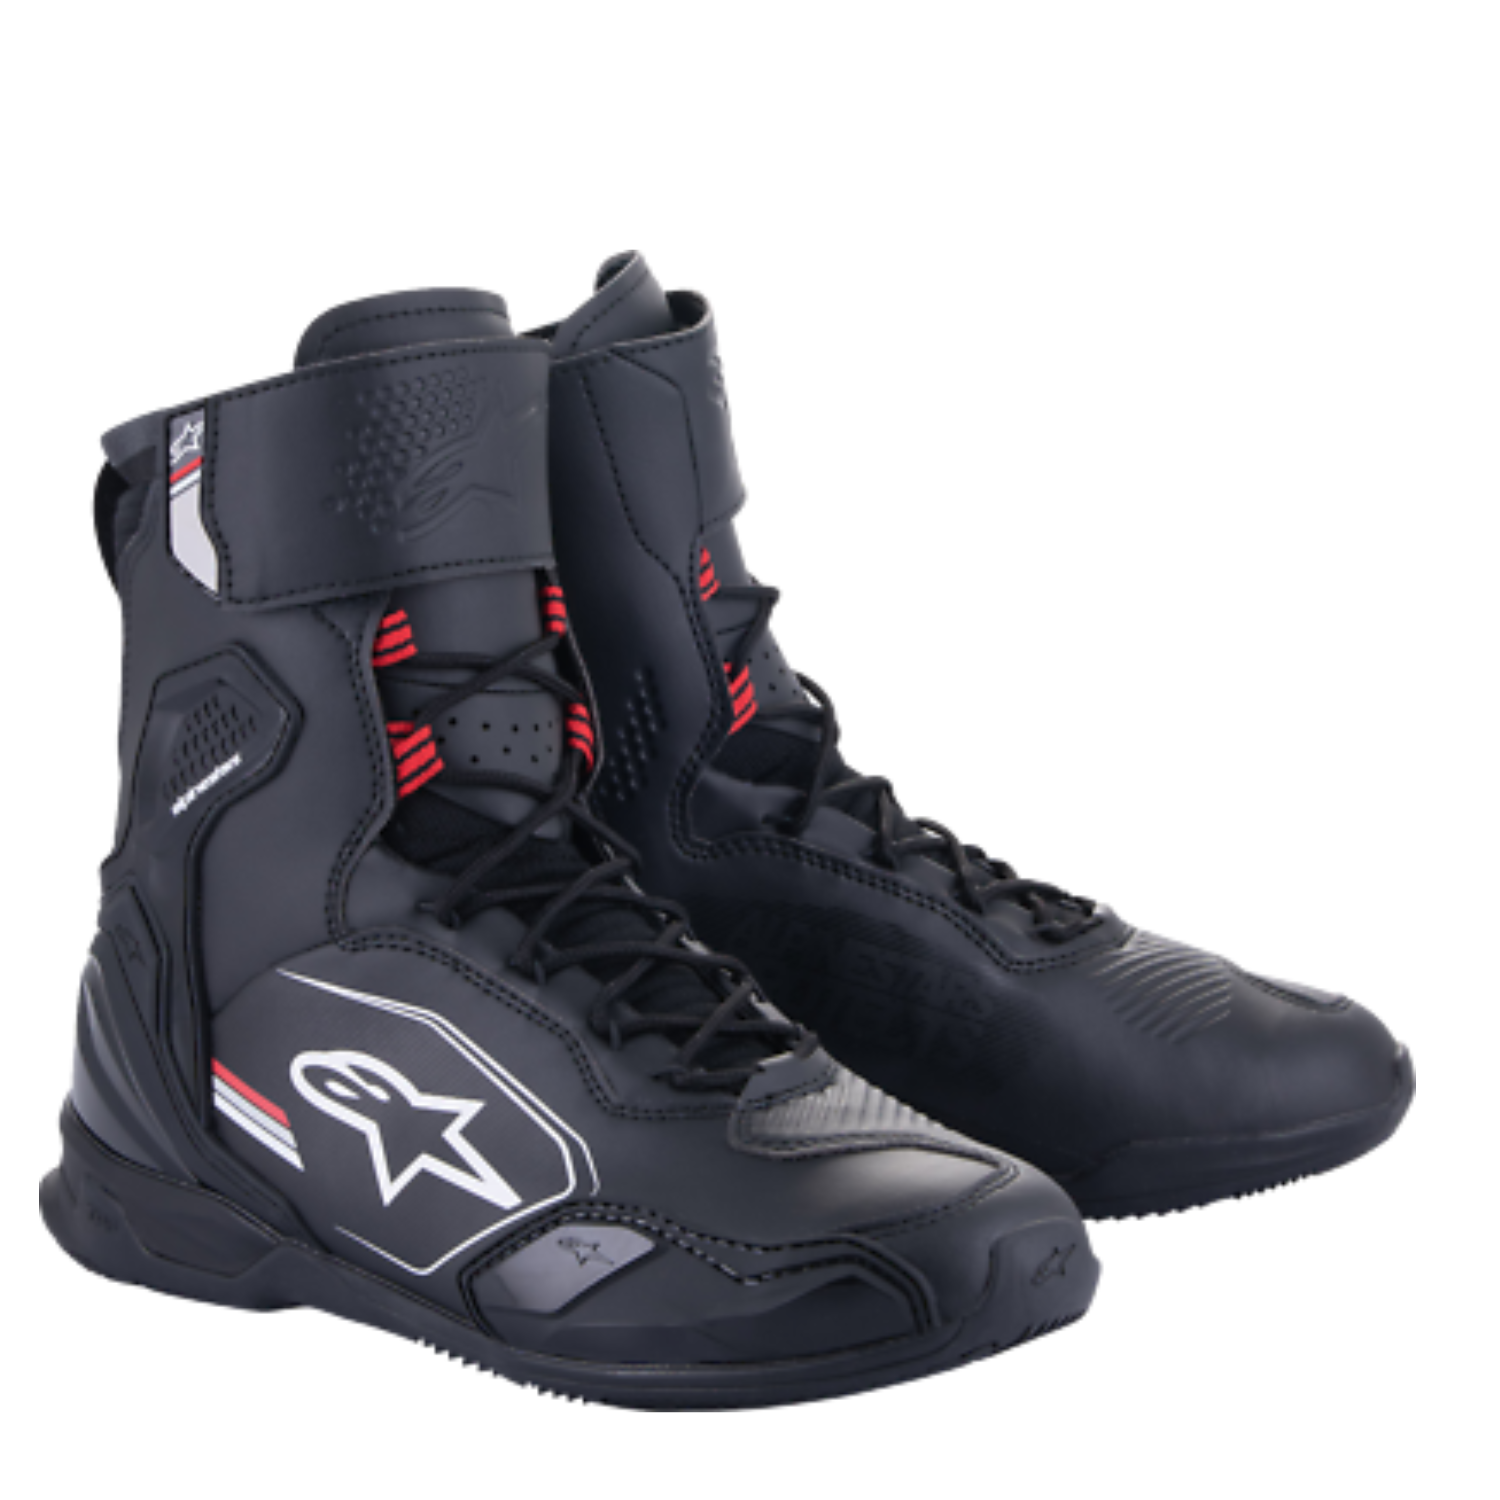 Image of Alpinestars Superfaster Shoes Black Gray Bright Red Size US 6 ID 8059347260747